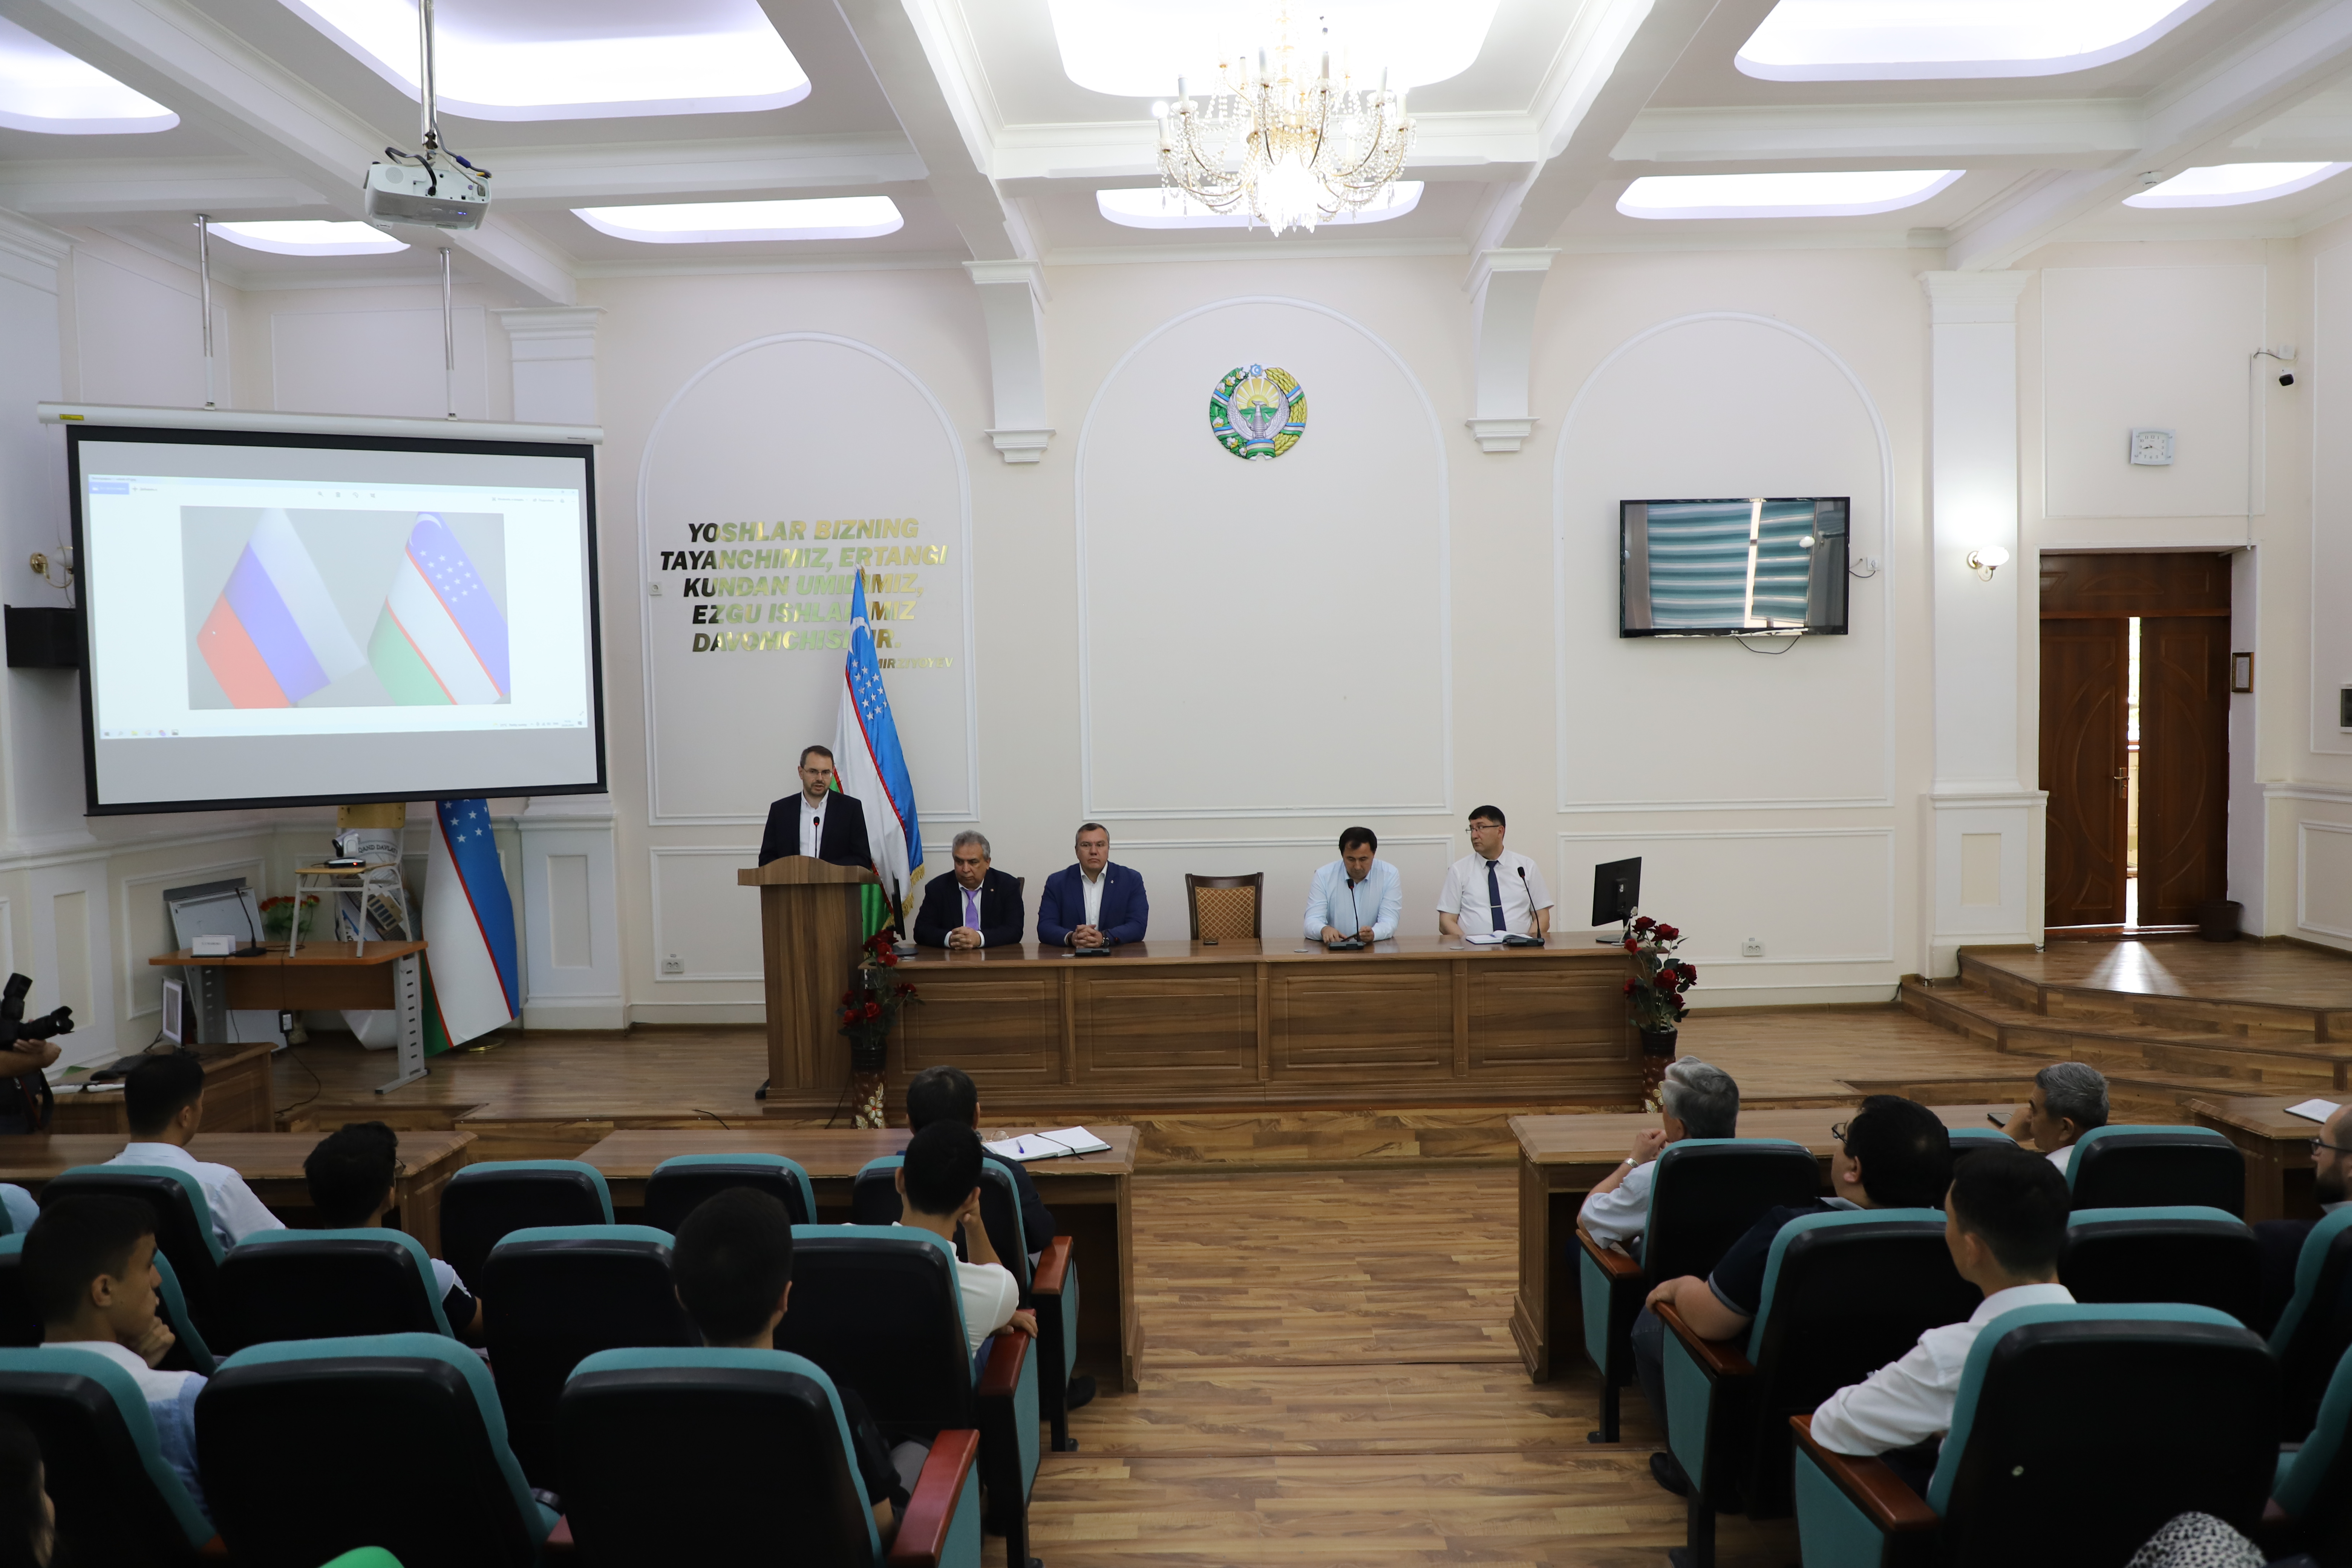 A meeting was held at the International Institute for Central Asian Studies with representatives of the delegation from the Russian Federation